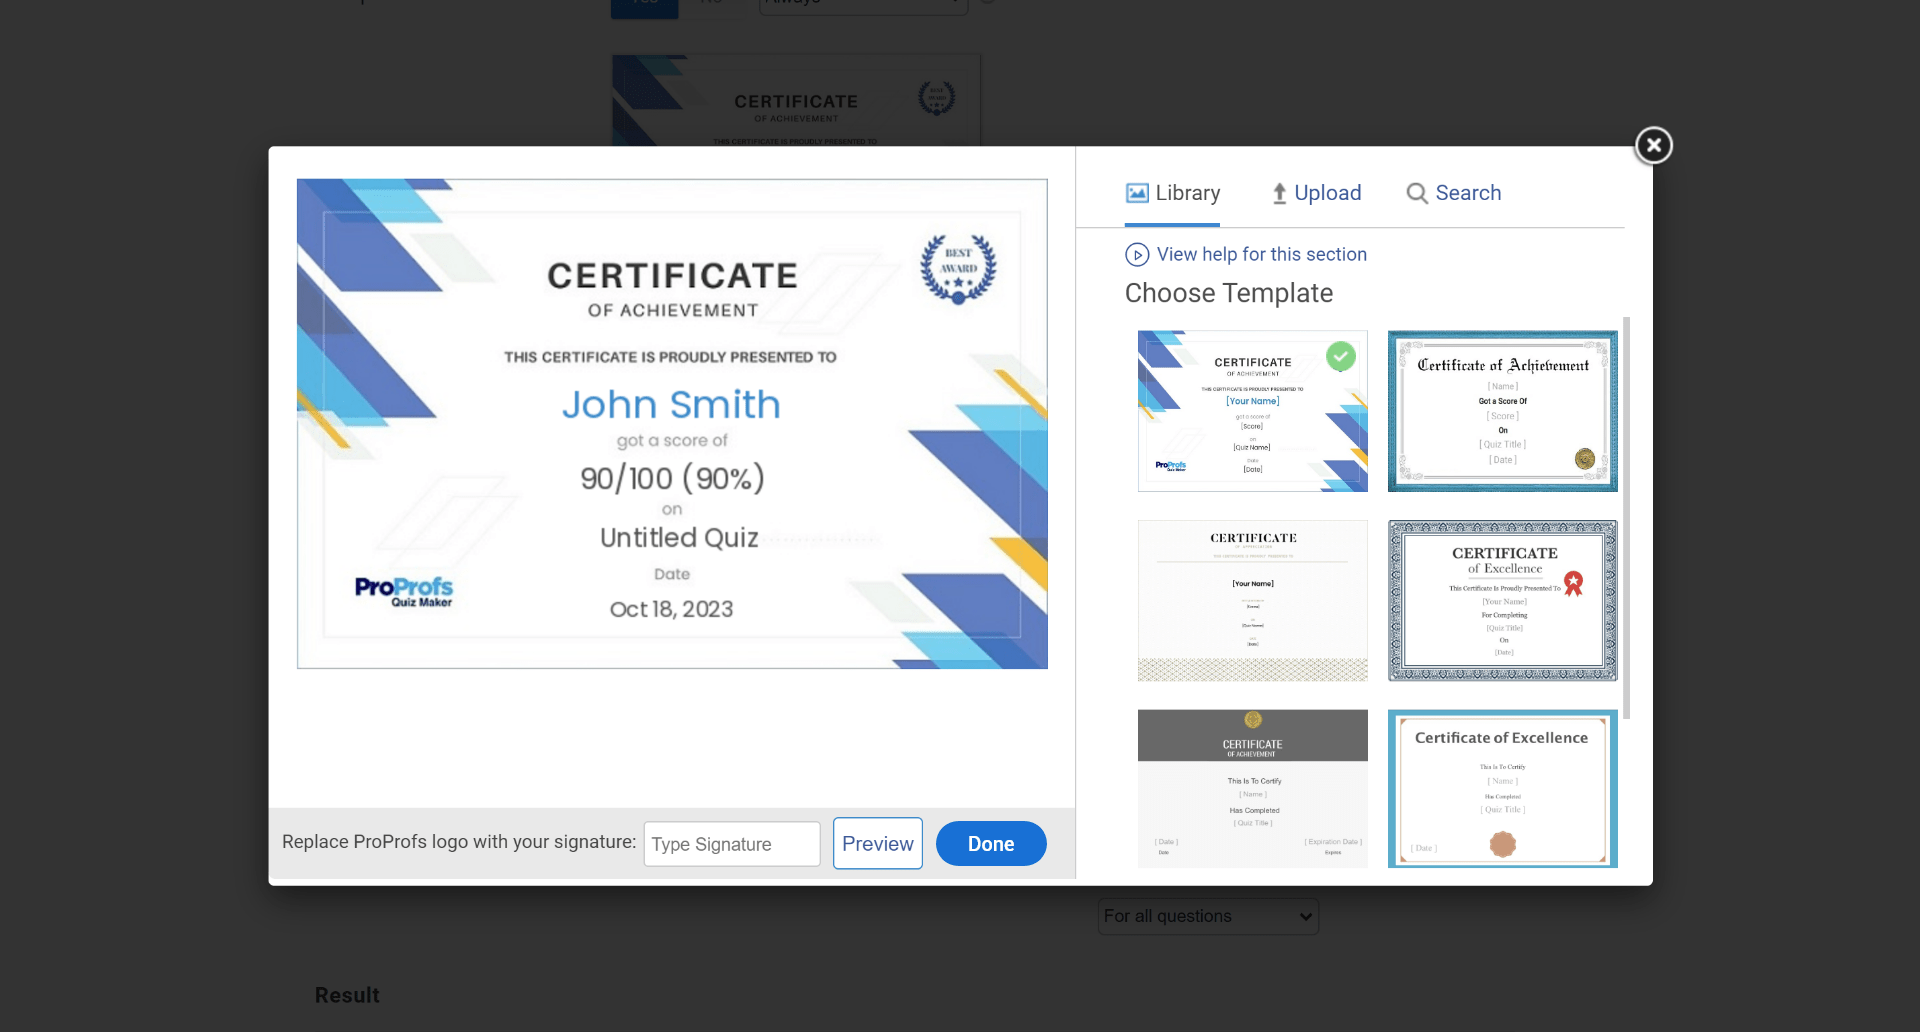 Setting Up Your Completion Certificates